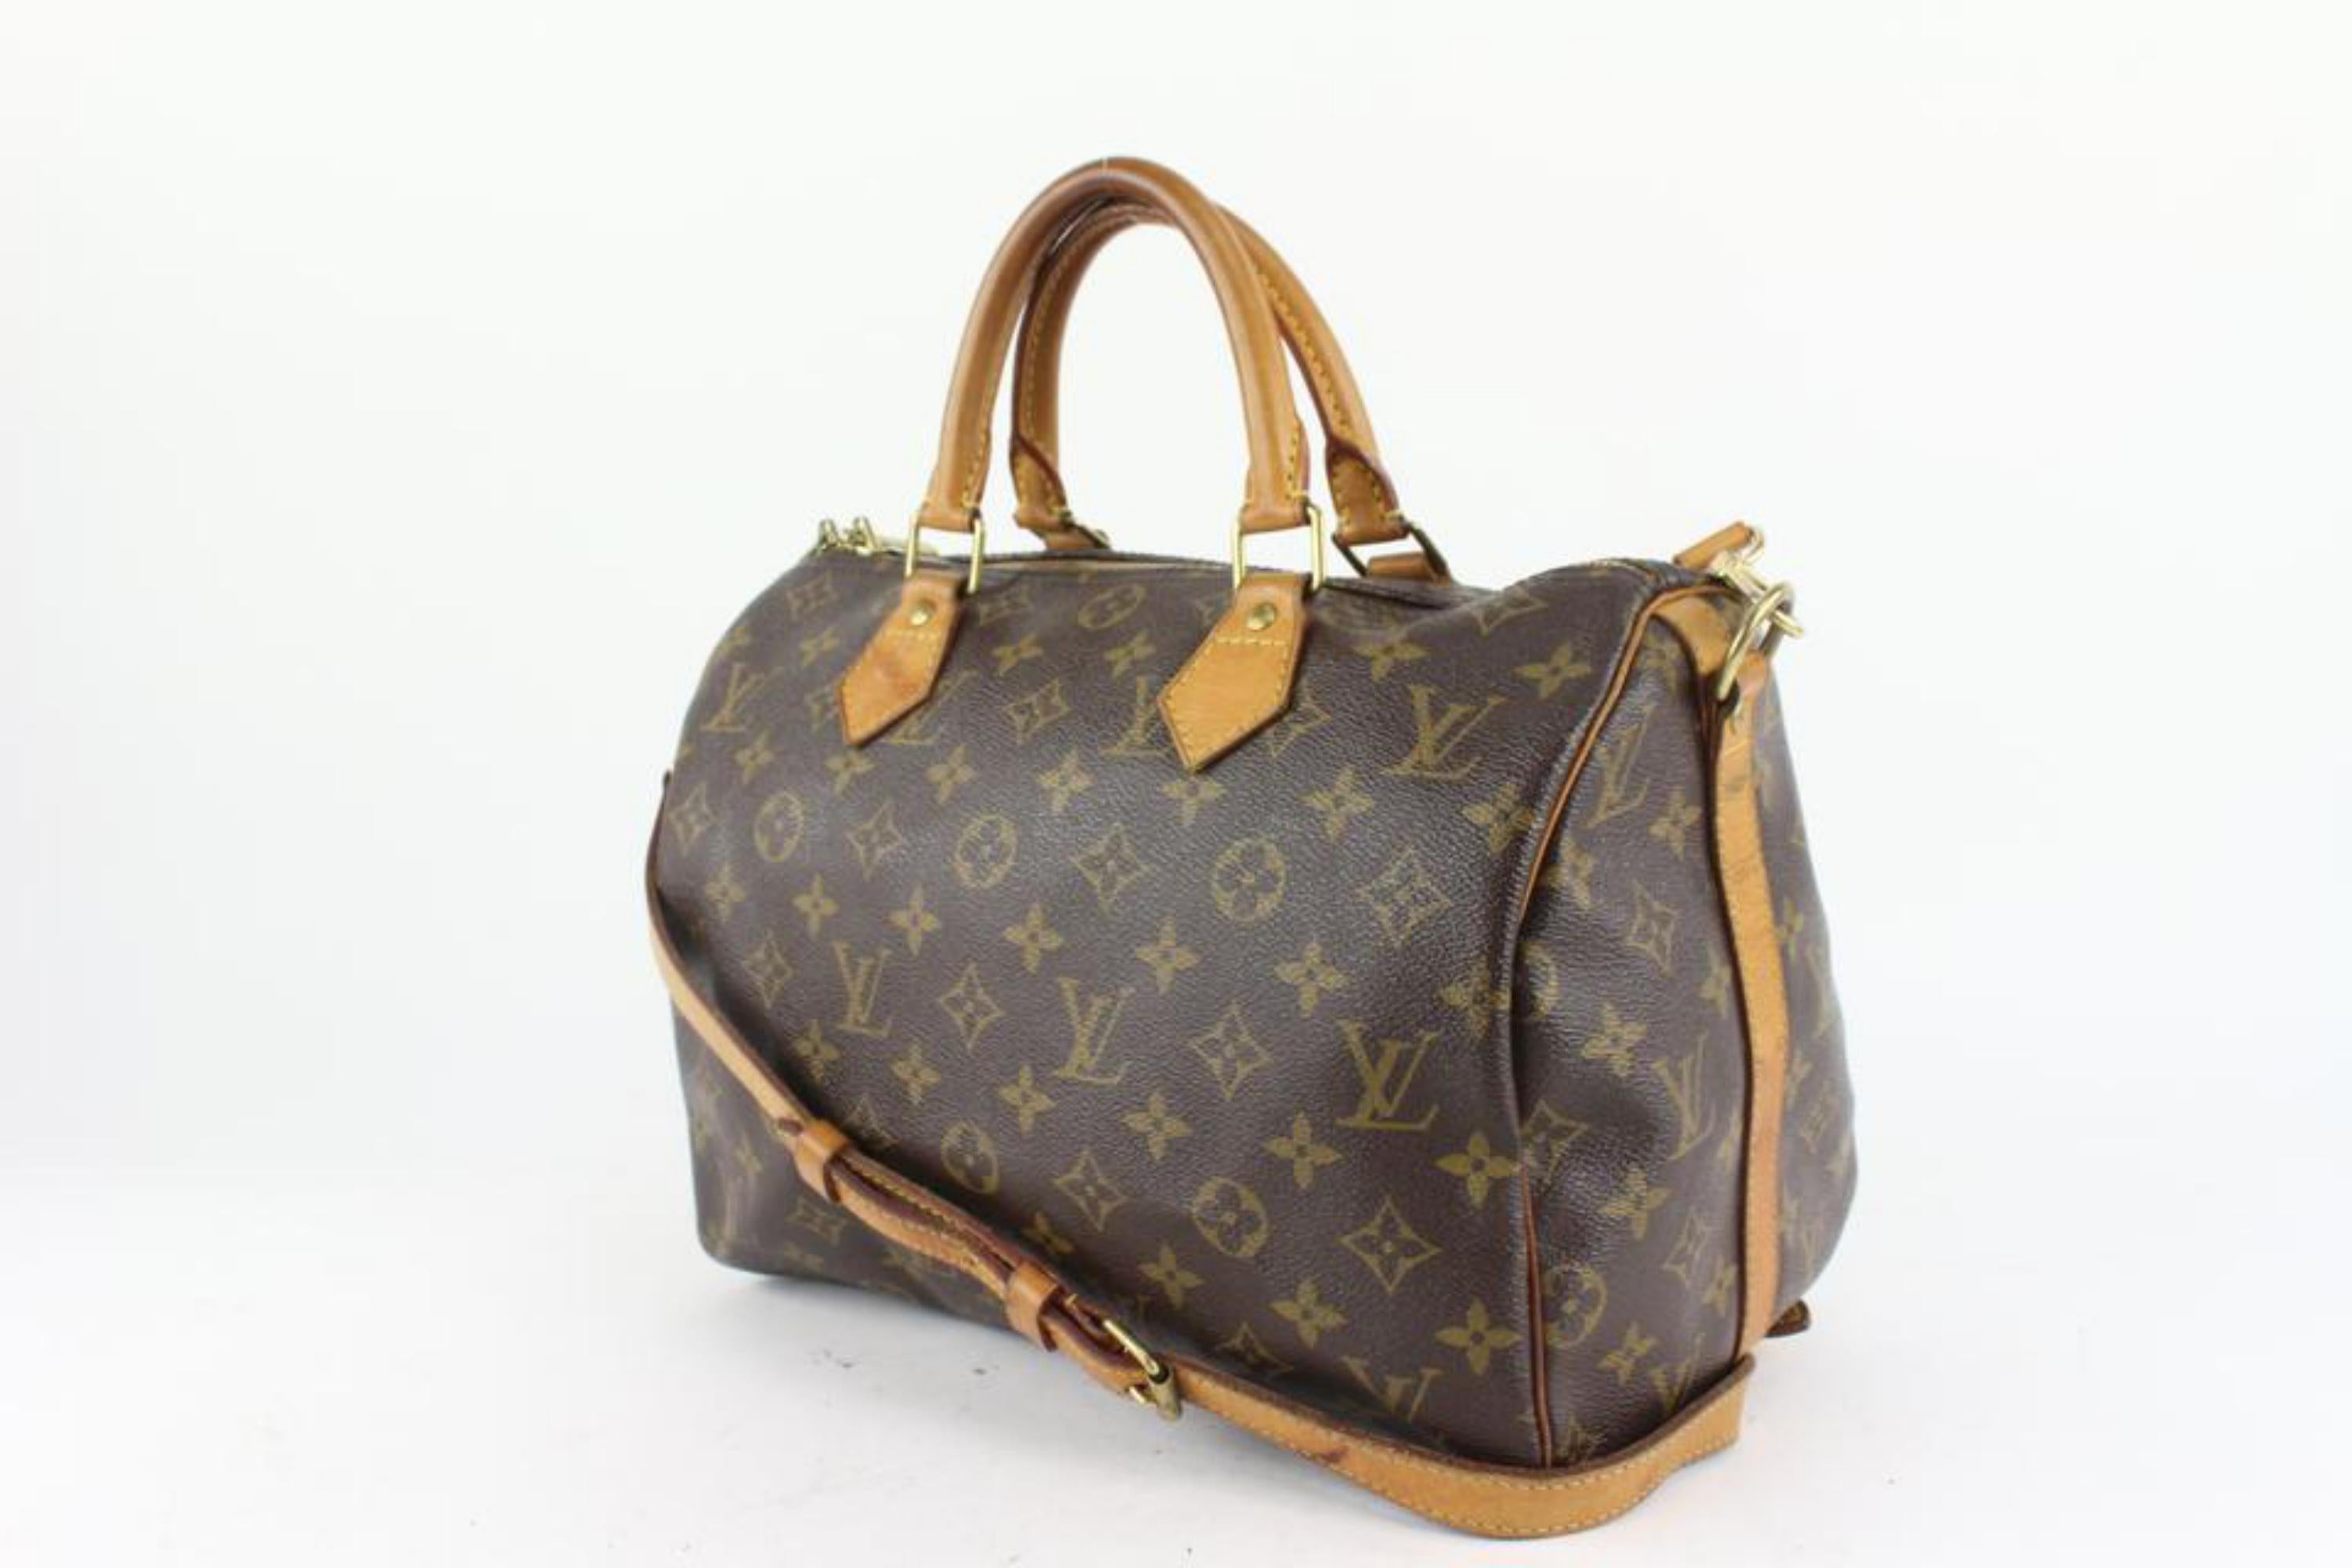 Louis Vuitton Monogram Speedy Bandouliere 30 Boston with Strap 1110lv12
Date Code/Serial Number: SP4122
Made In: France
Measurements: Length:  11.75